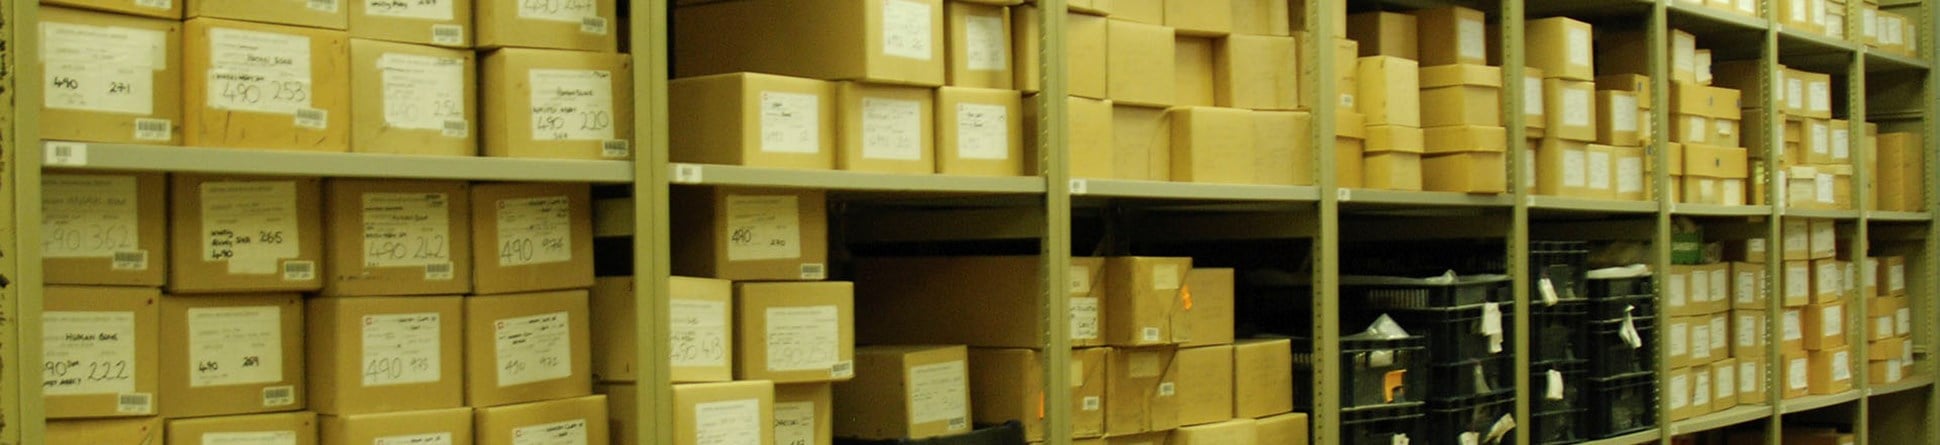 Labelled archive boxes on shelves within an archives store